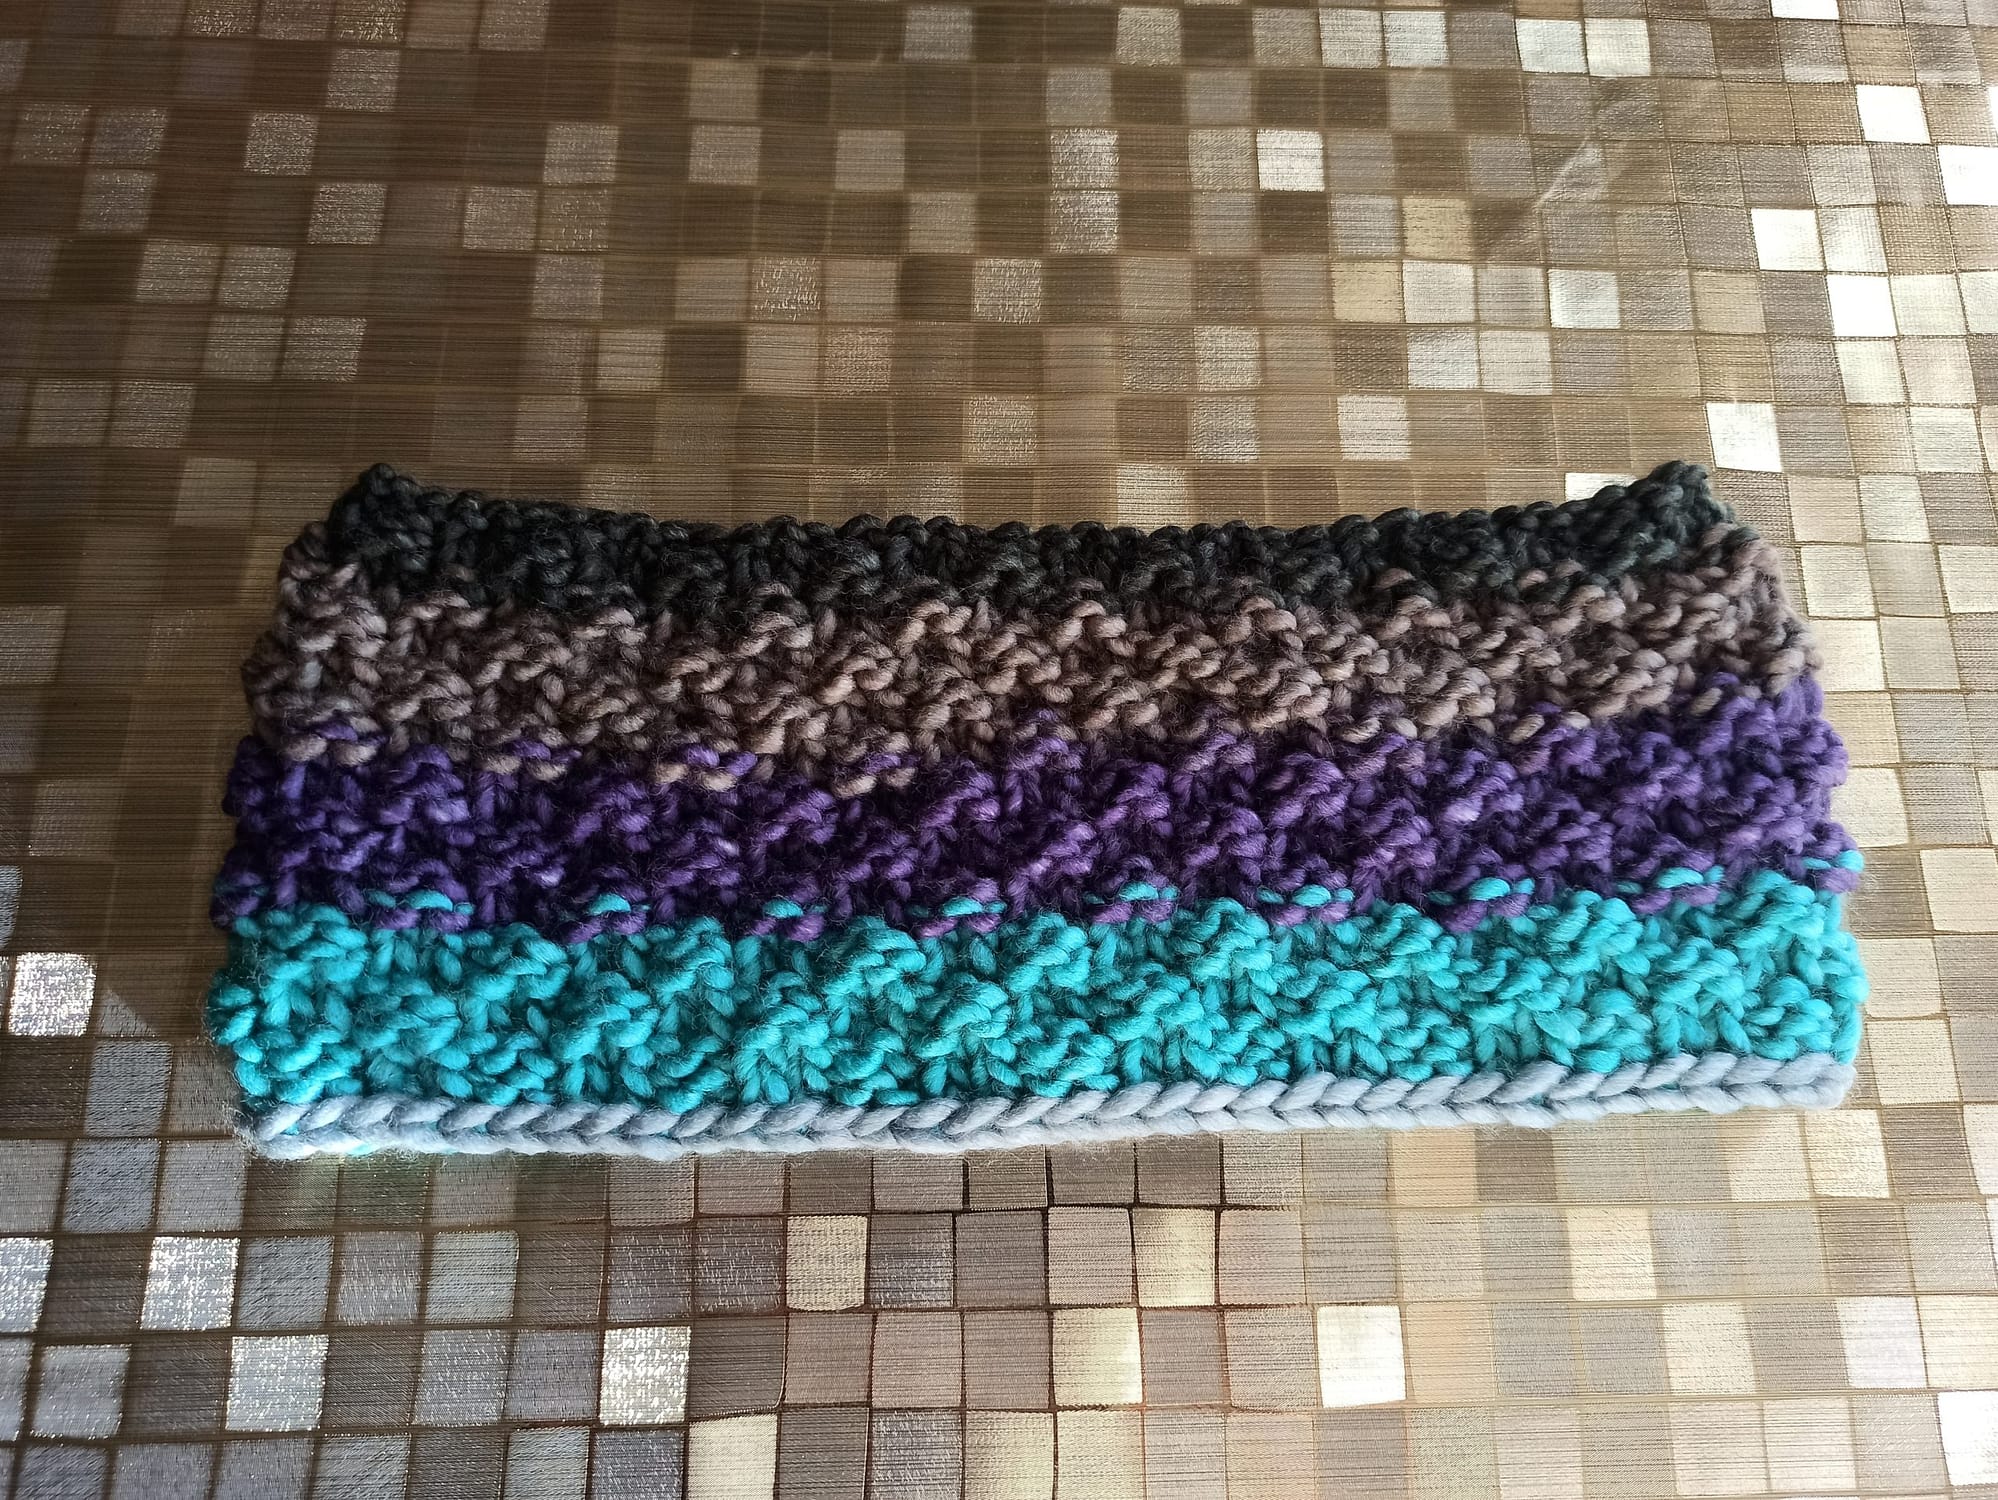 The knit before Christmas - Cowl 7